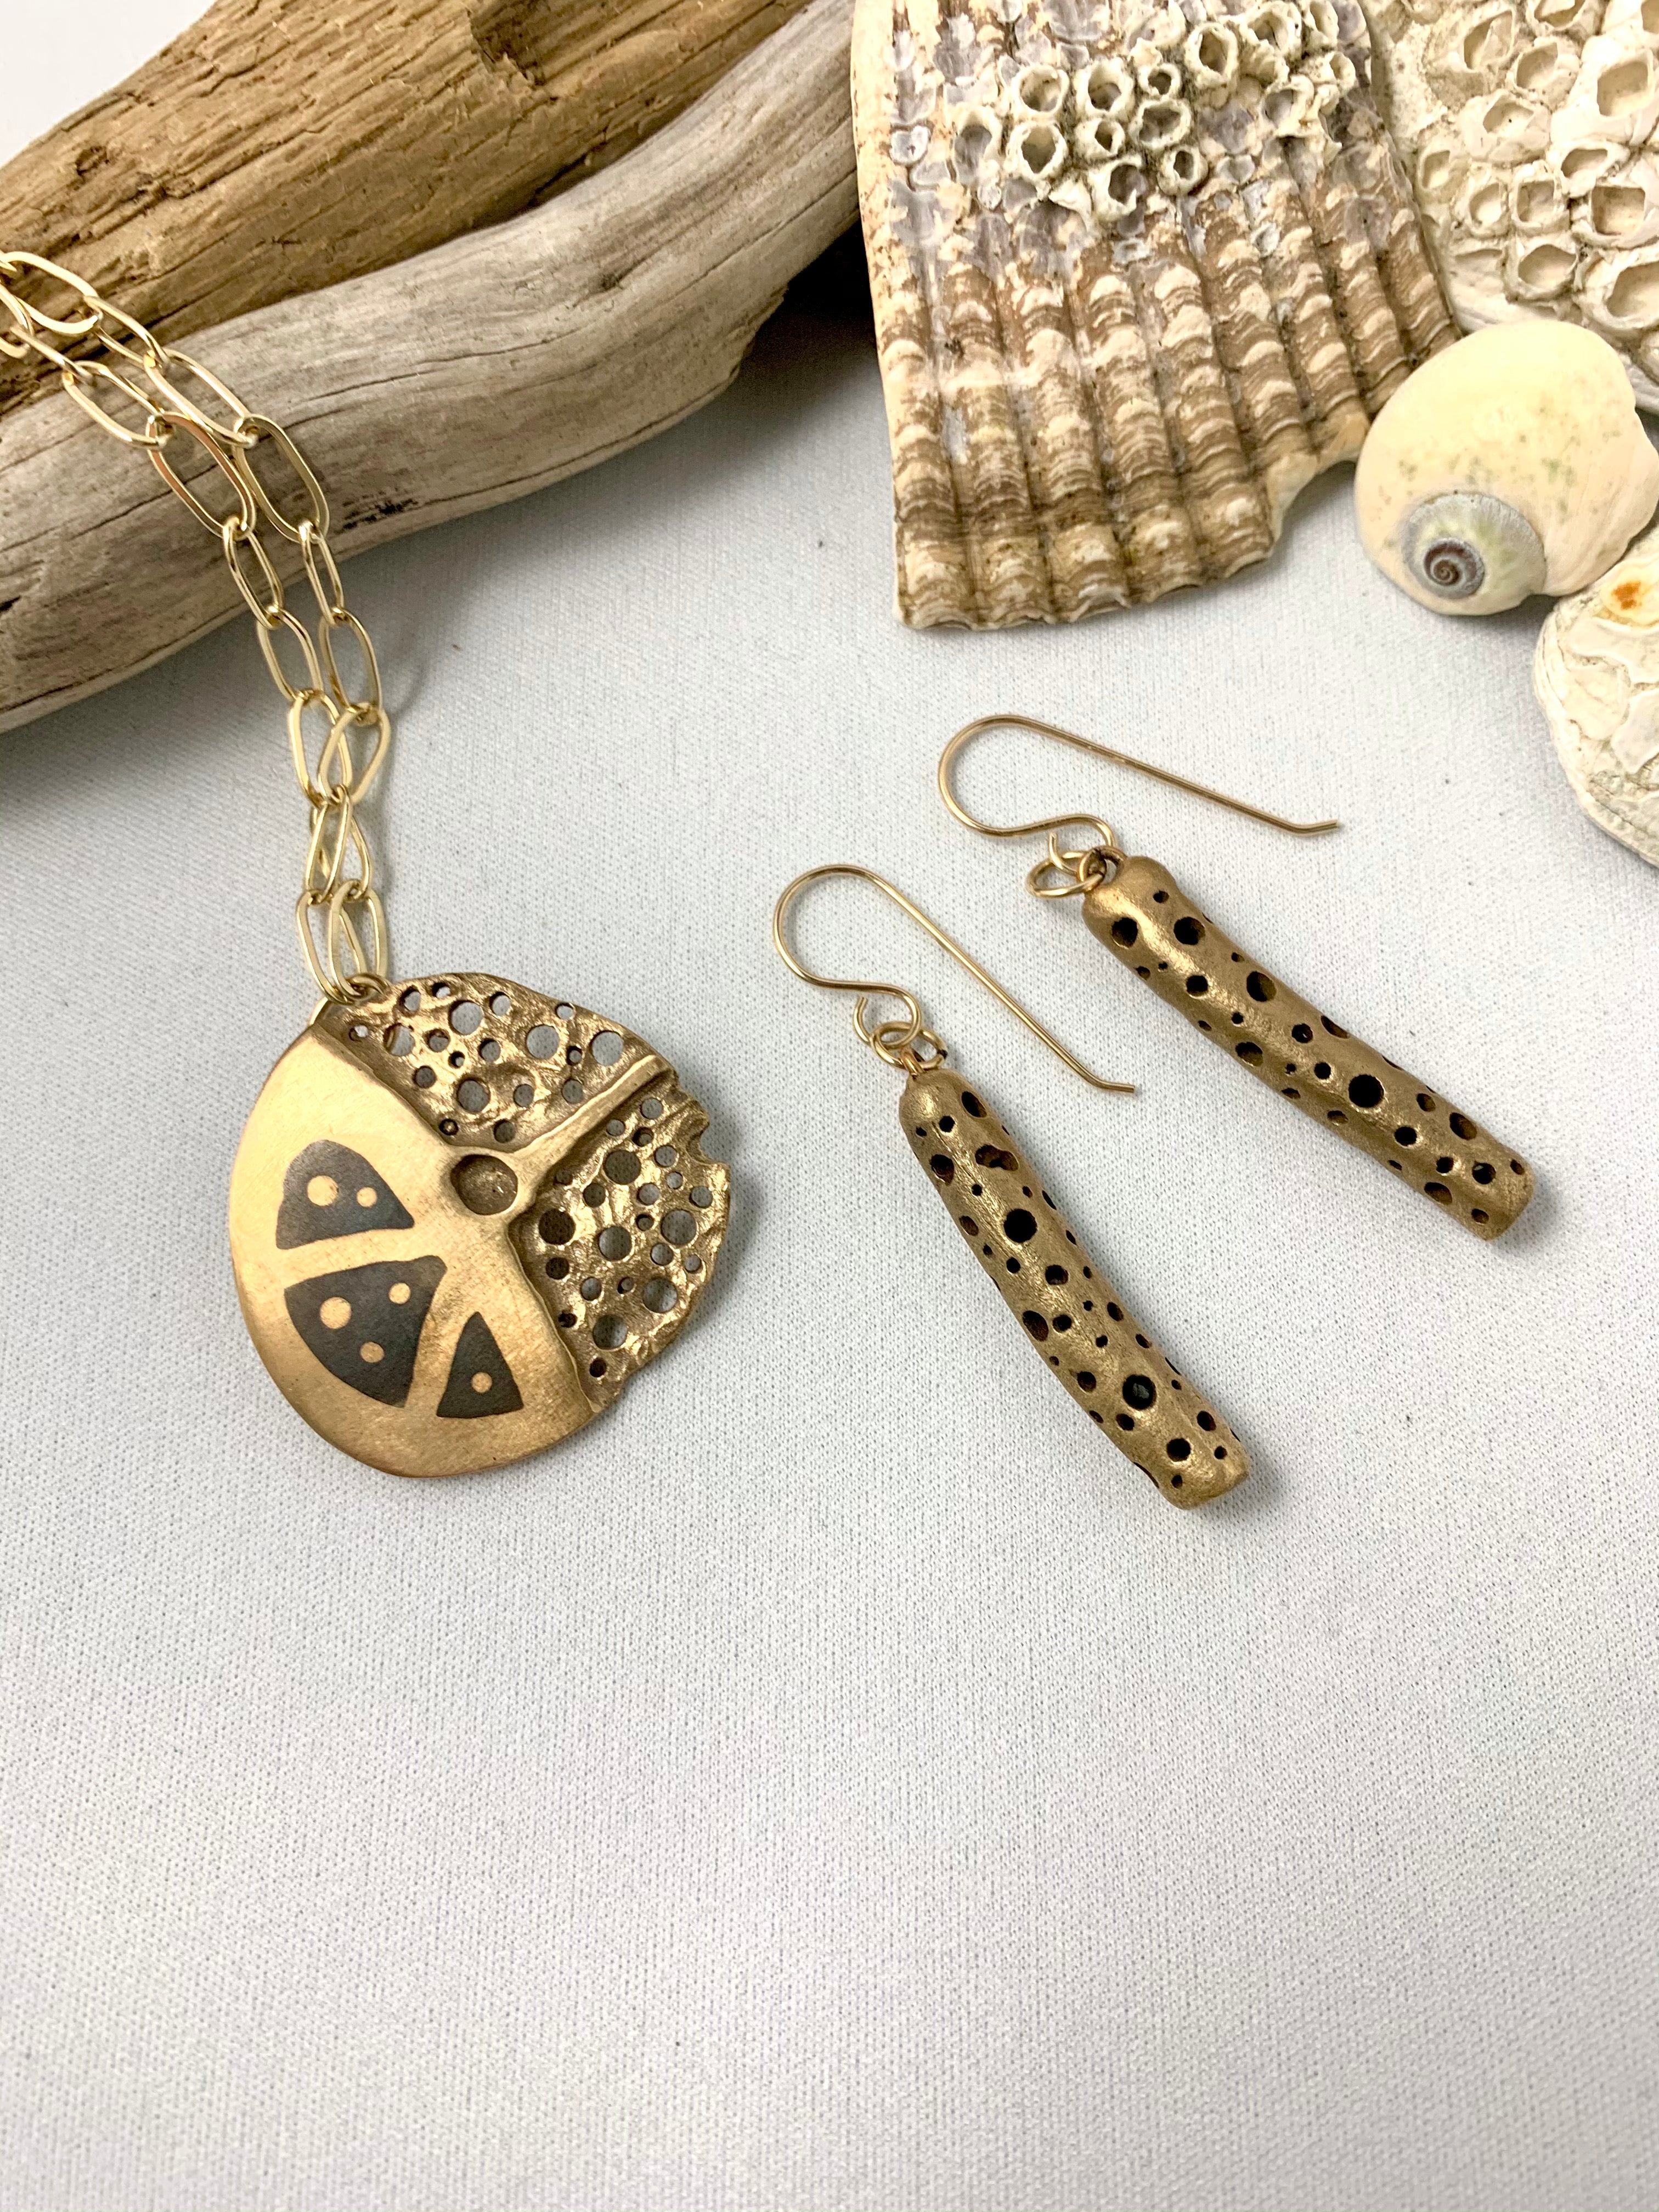 Artisan made bronze necklace paired with artisan made earrings